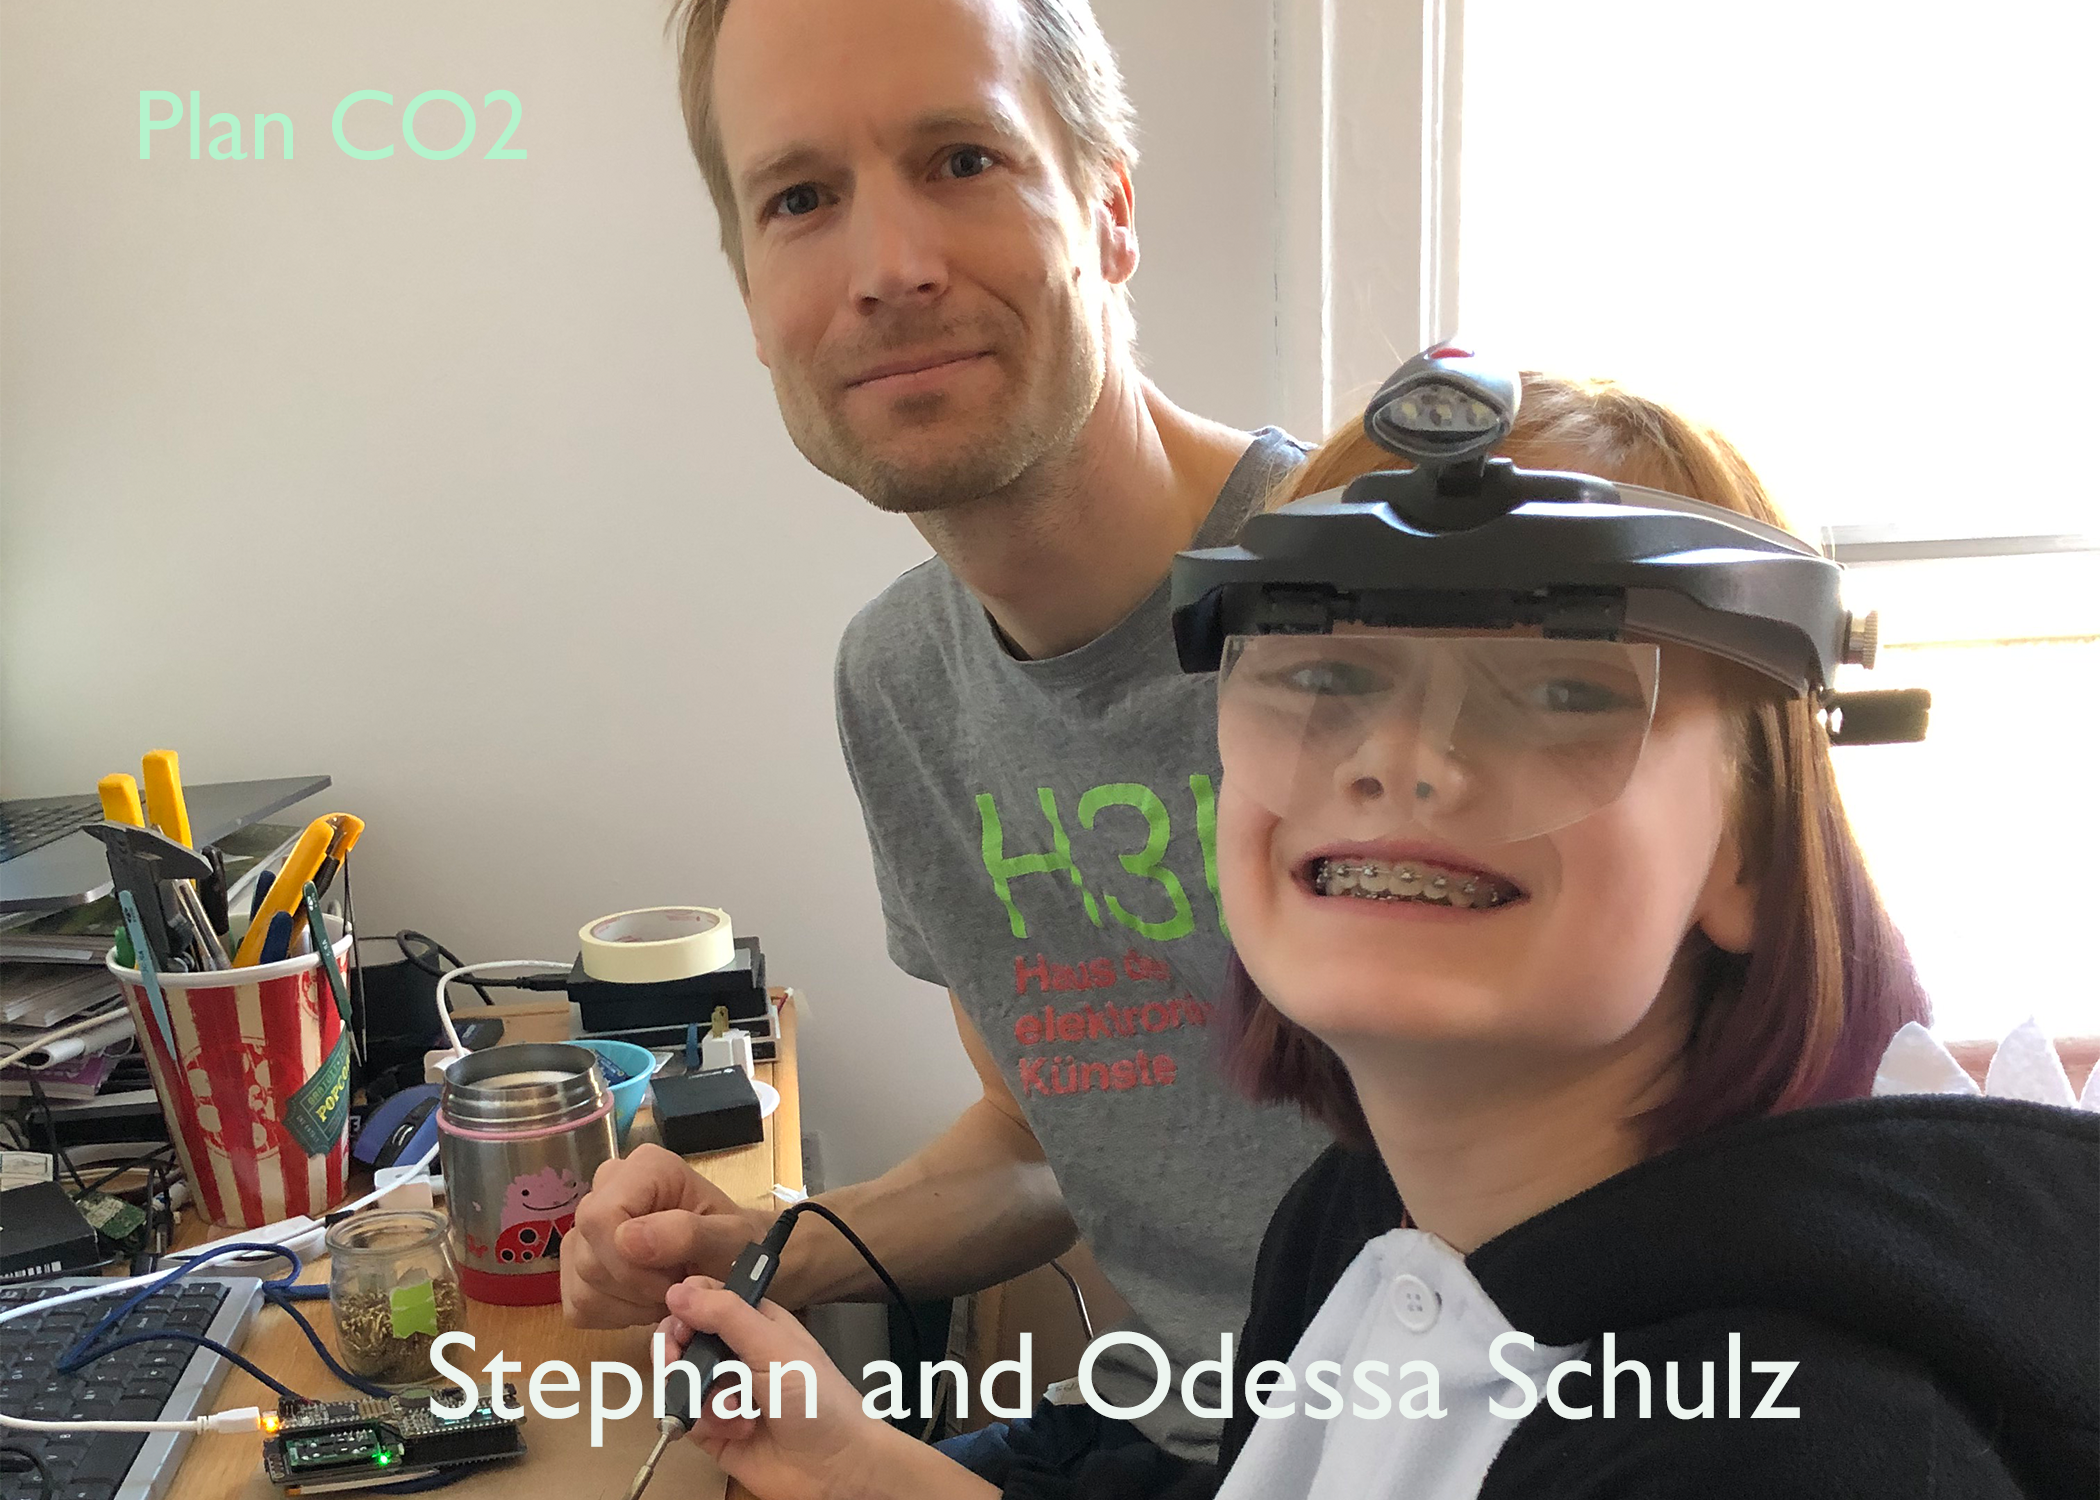 Stephan and Odessa Schulz at a workbench